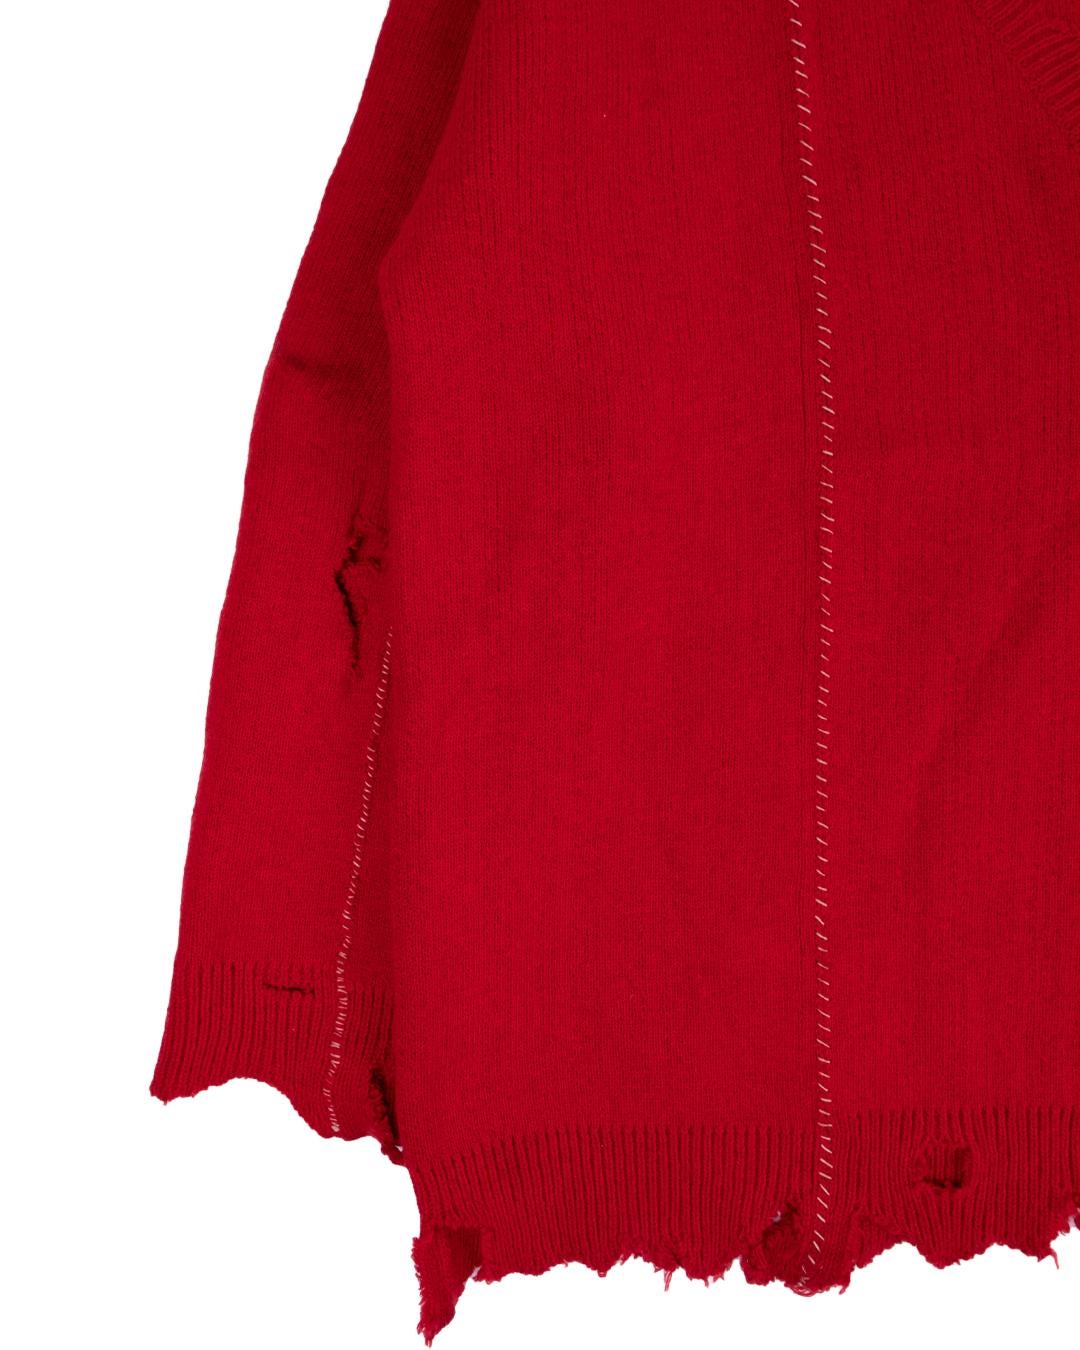 Raf Simons AW2016 Patched Varsity Sweater 1